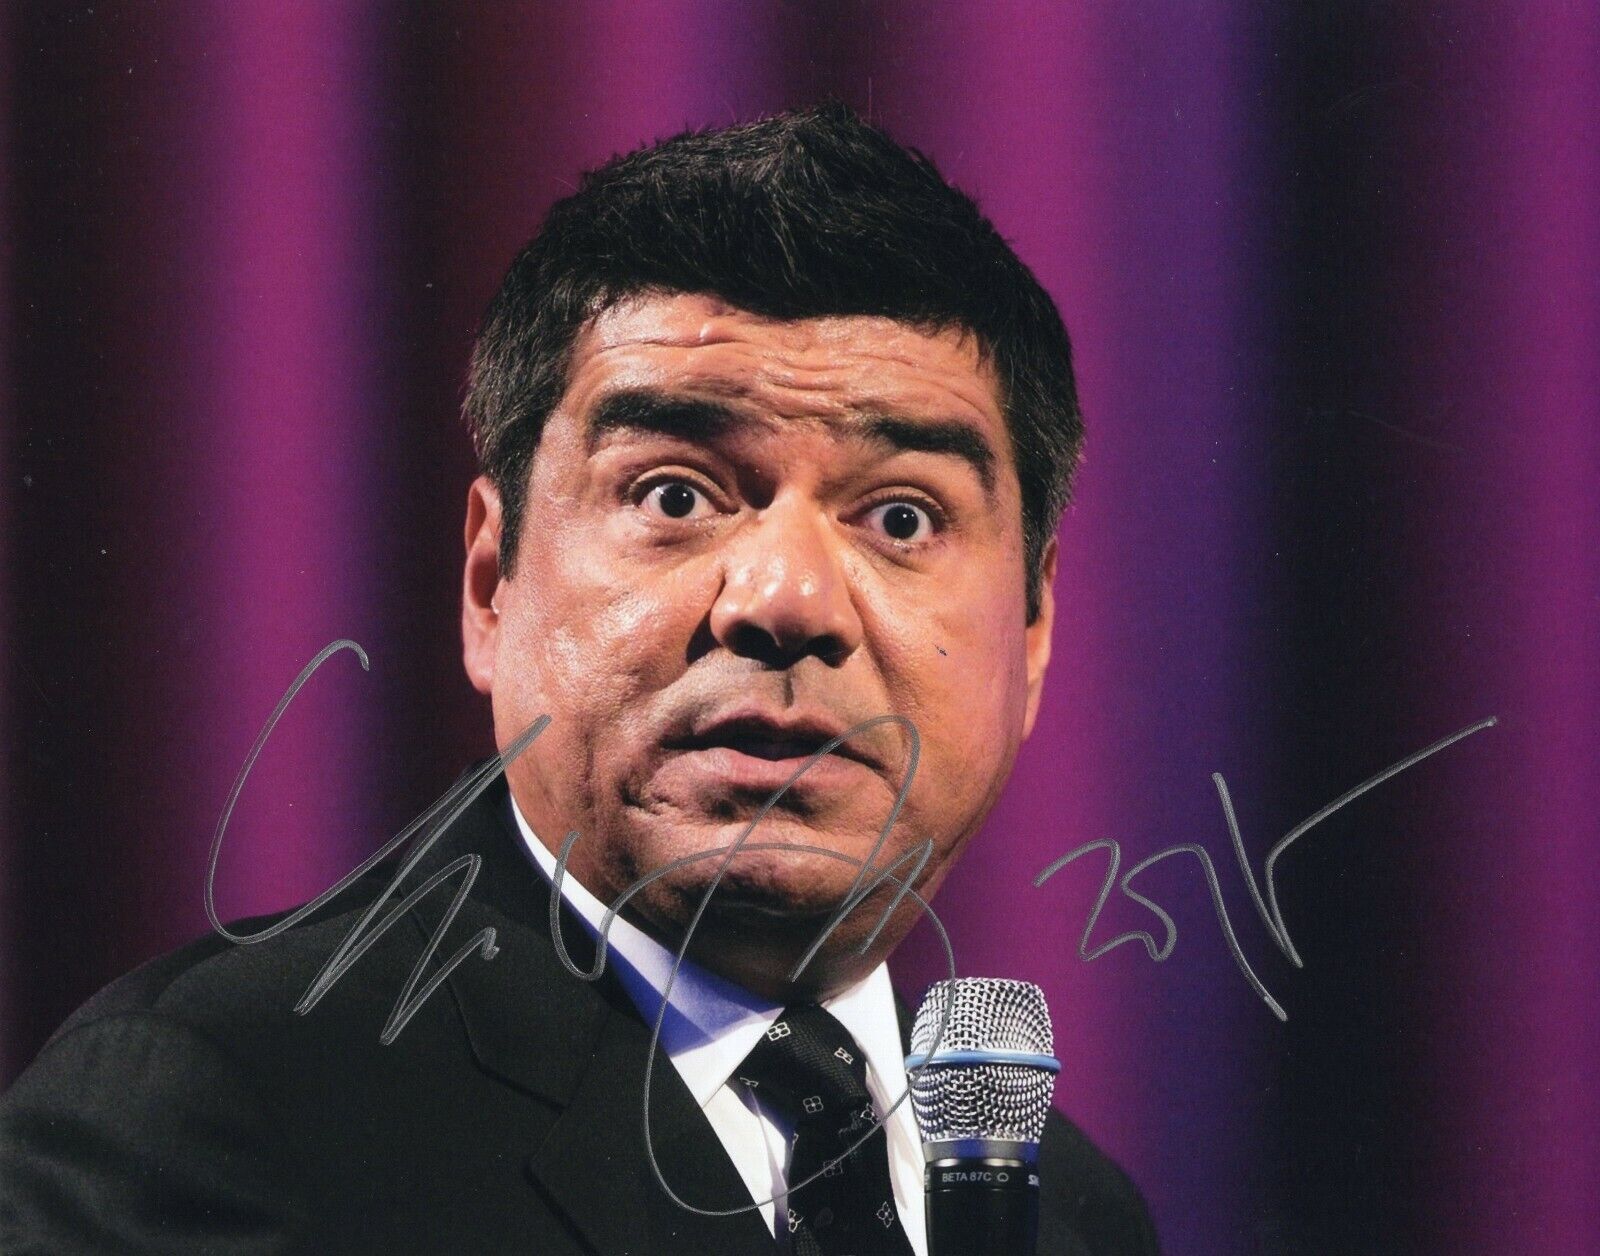 George Lopez Signed 8x10 Photo Poster painting w/COA Comedian George Lopez Lopez Tonight #1